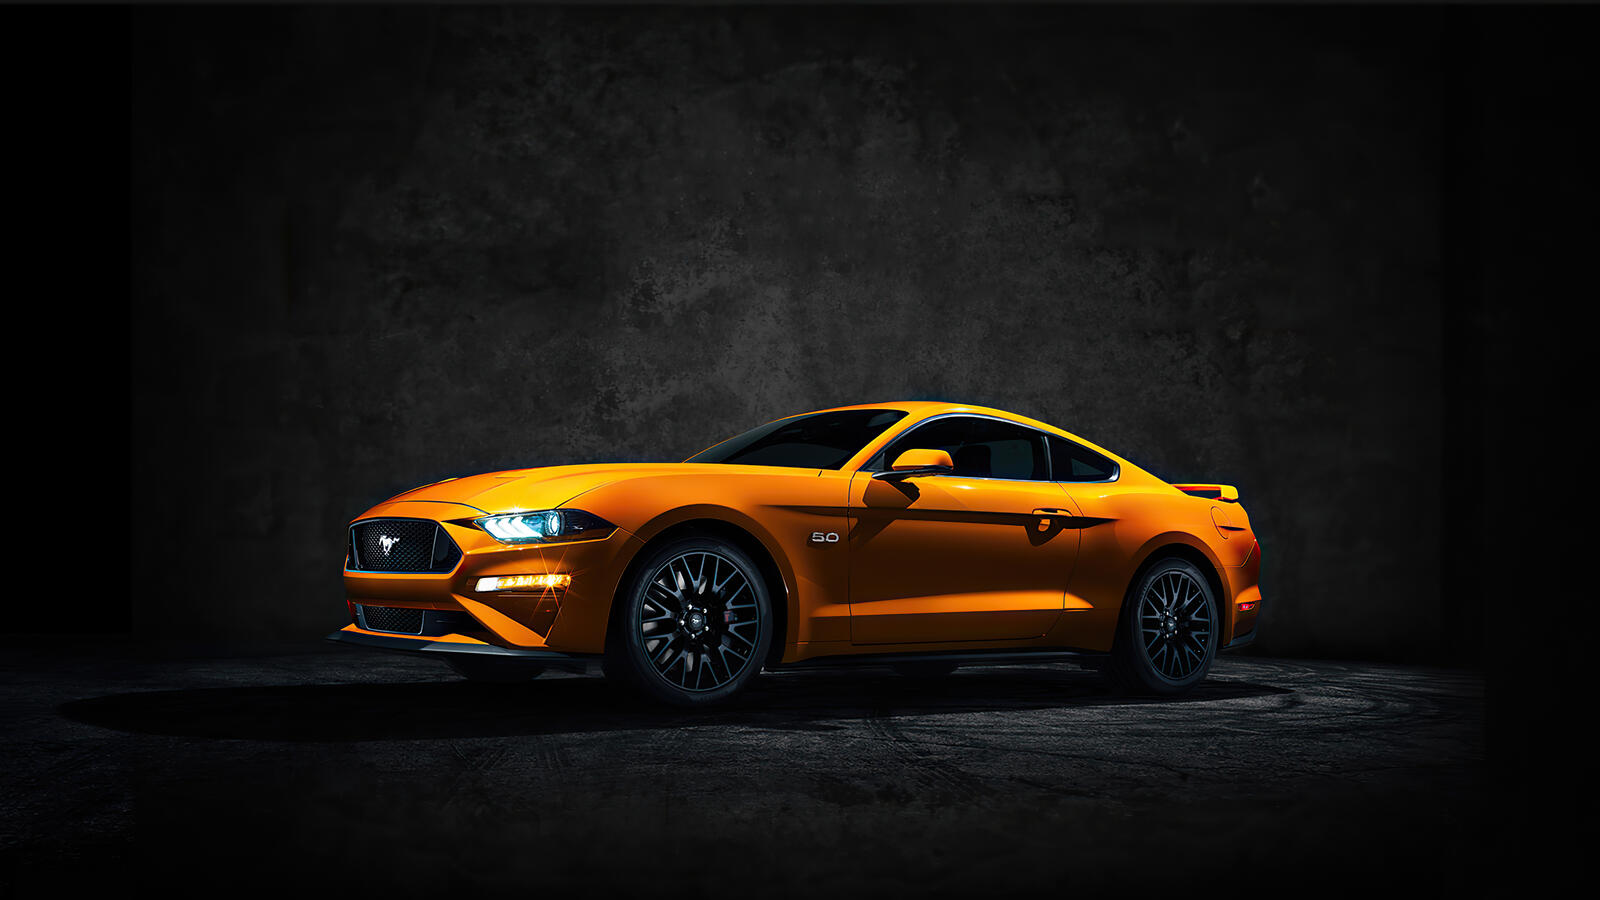 Free photo A yellow Ford Mustang in a darkened room.